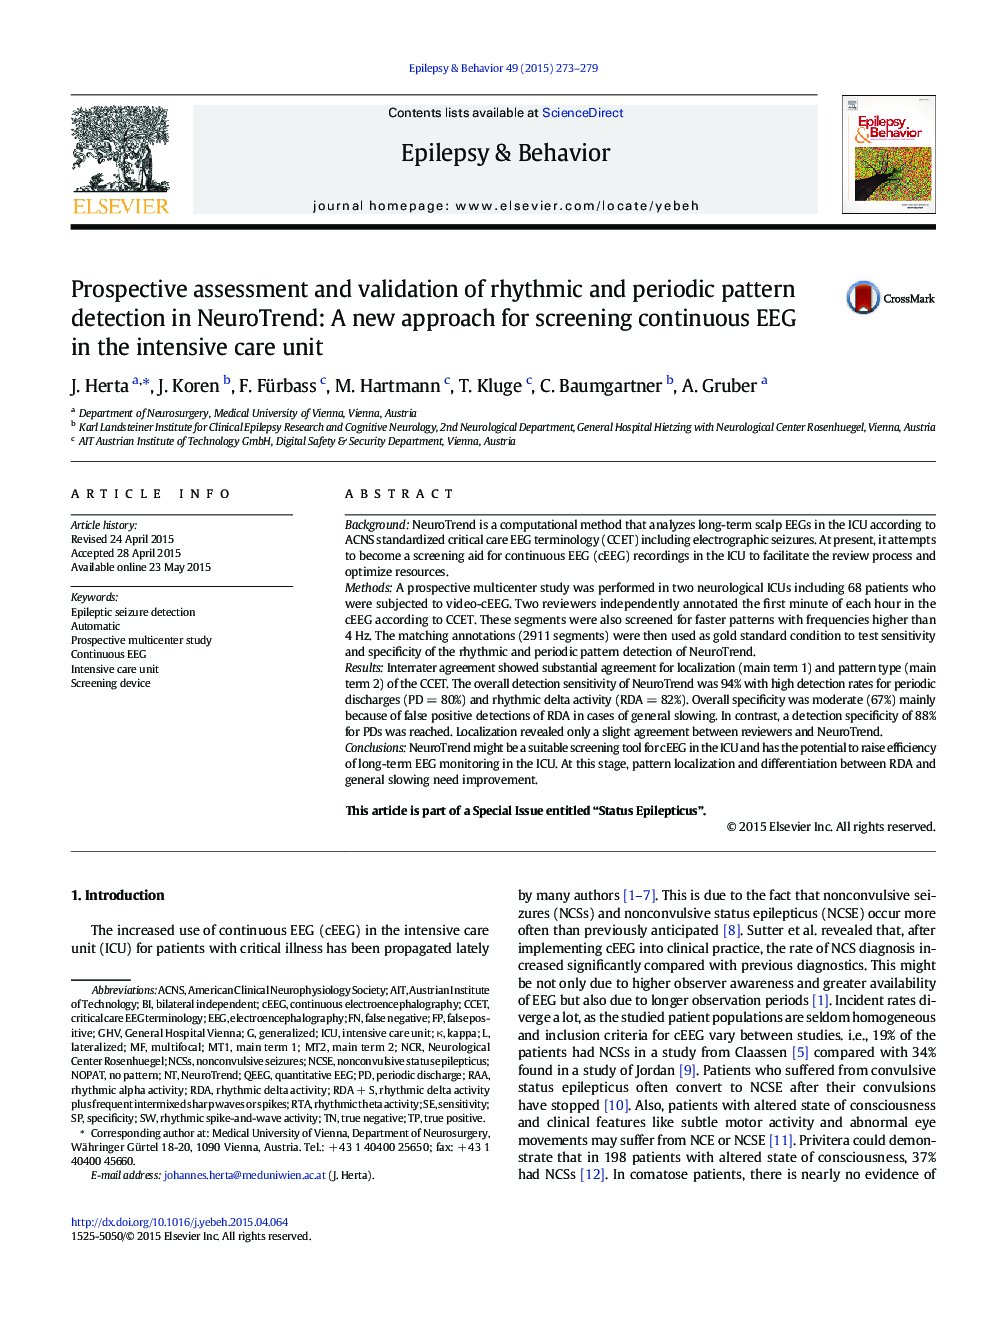 Prospective assessment and validation of rhythmic and periodic pattern detection in NeuroTrend: A new approach for screening continuous EEG in the intensive care unit